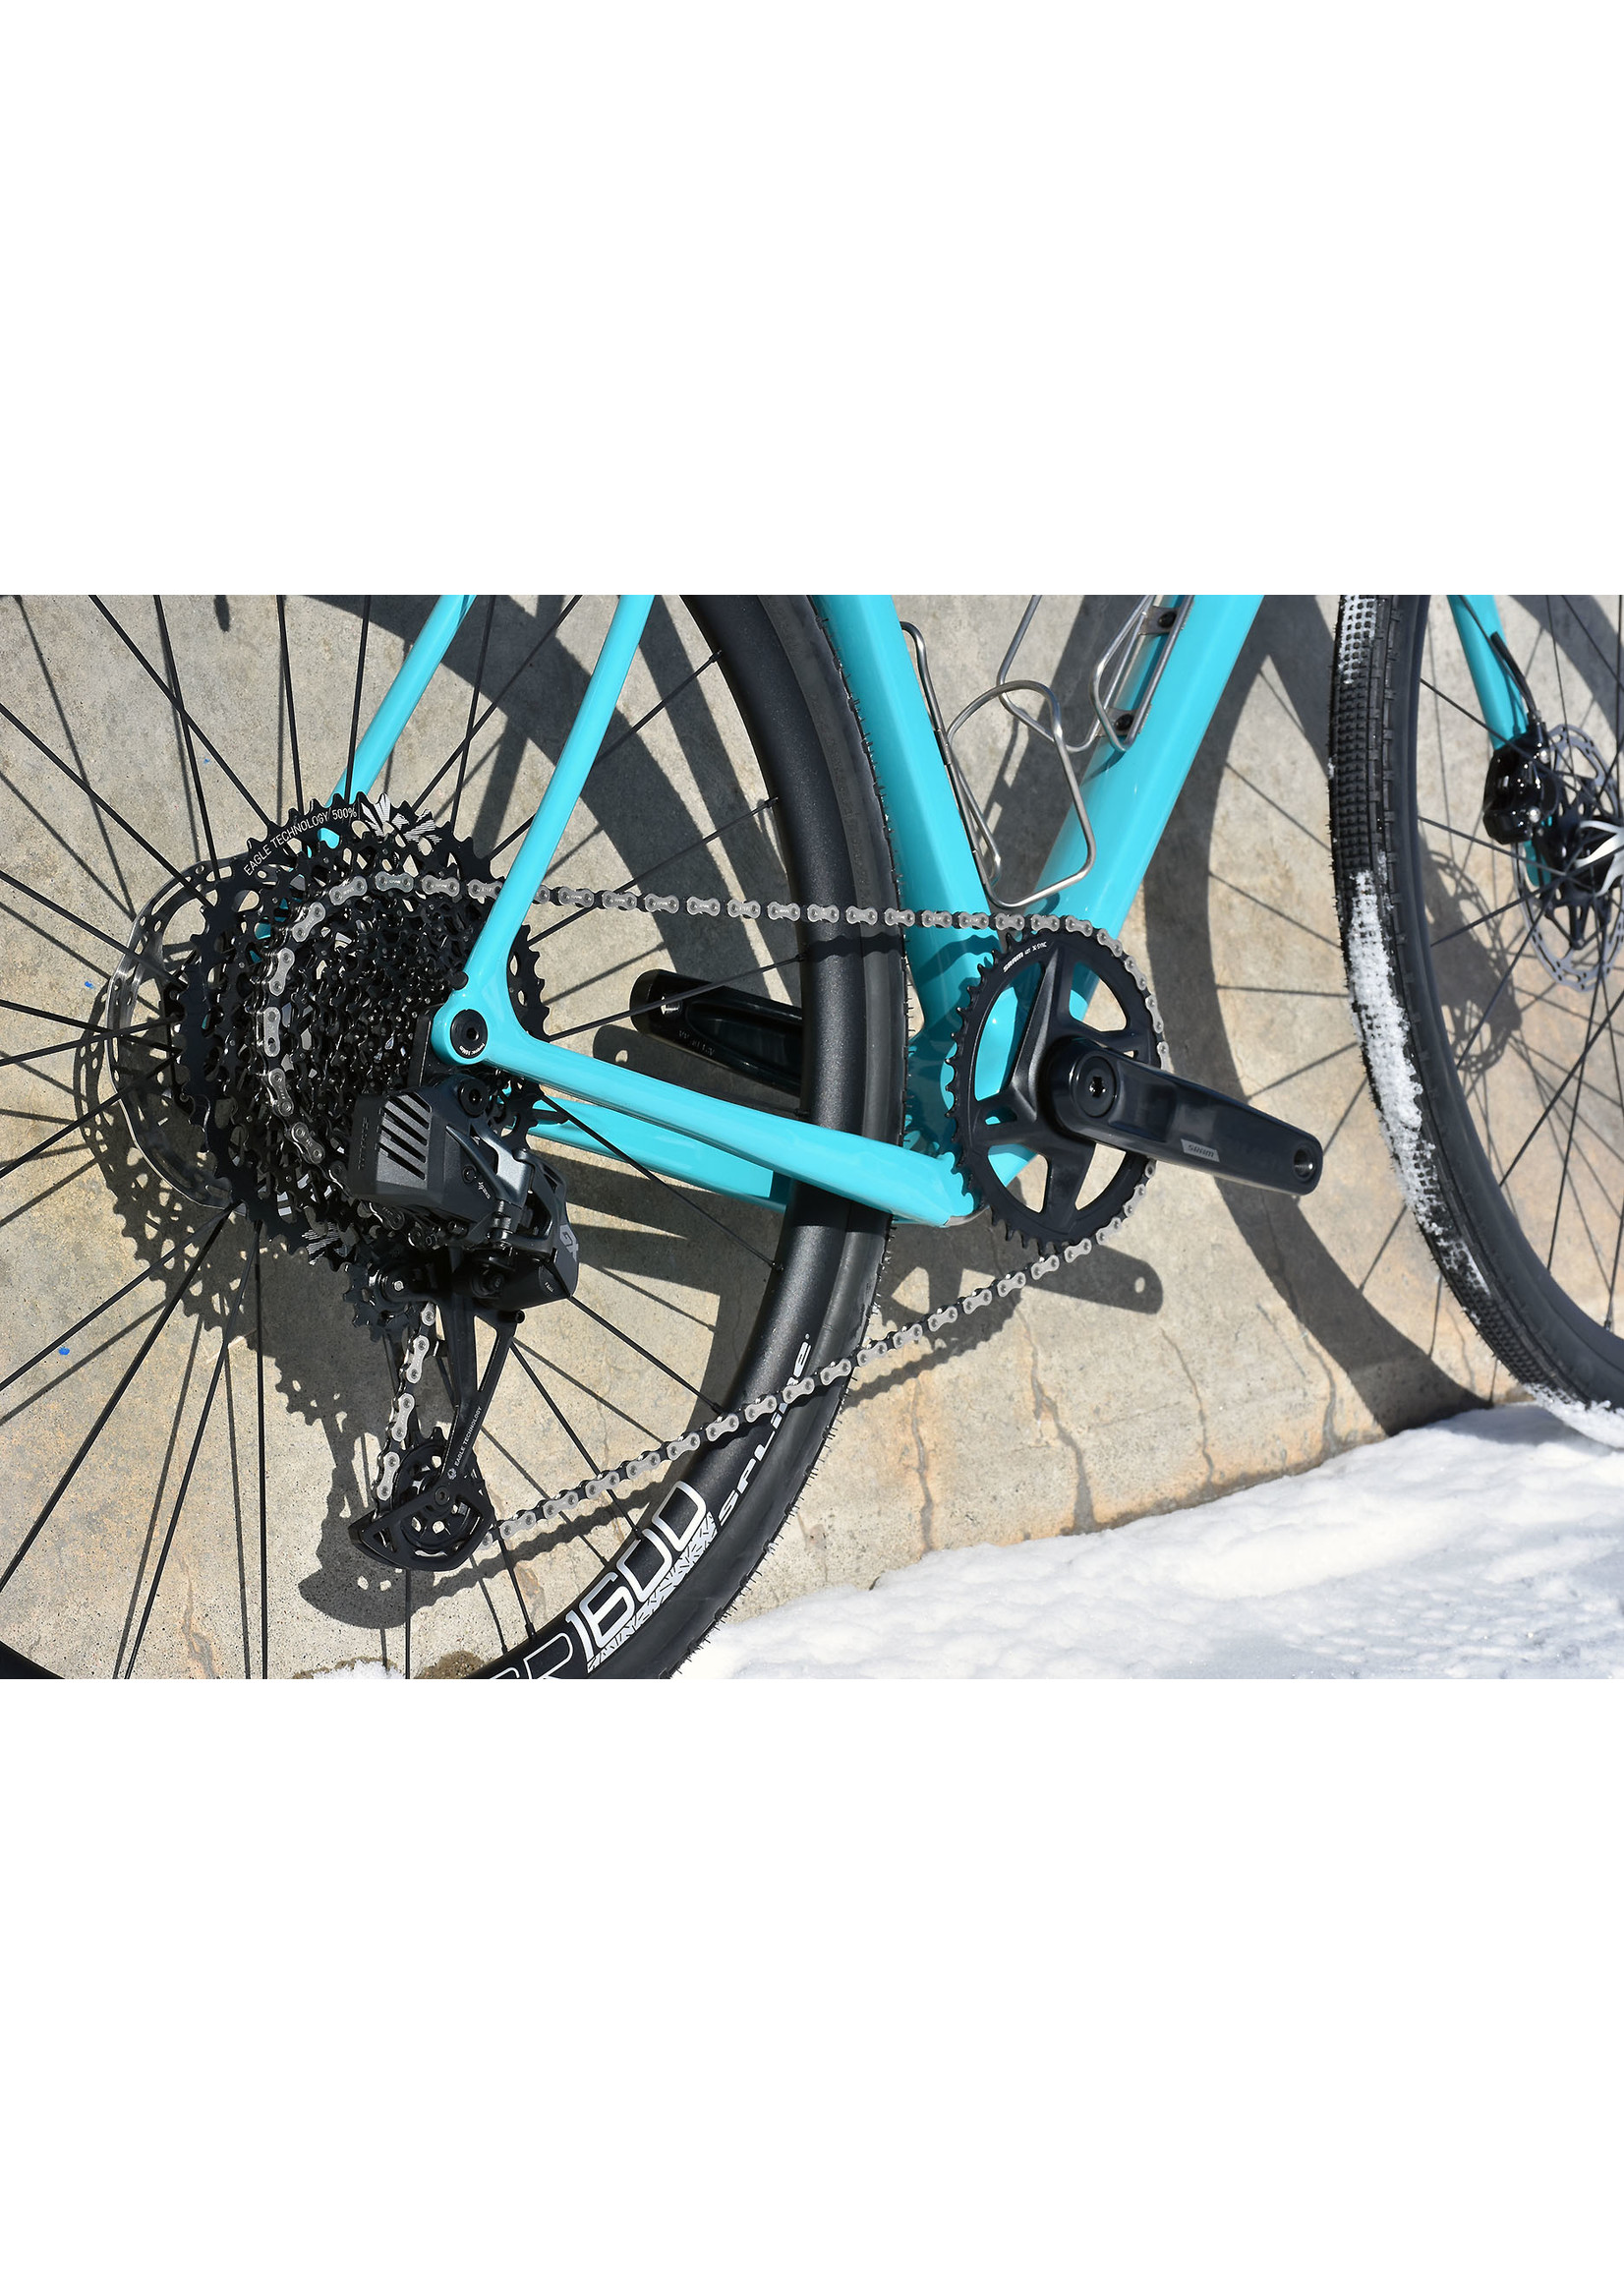 OPEN CYCLE OPEN WIDE SRAM Rival 1 AXS